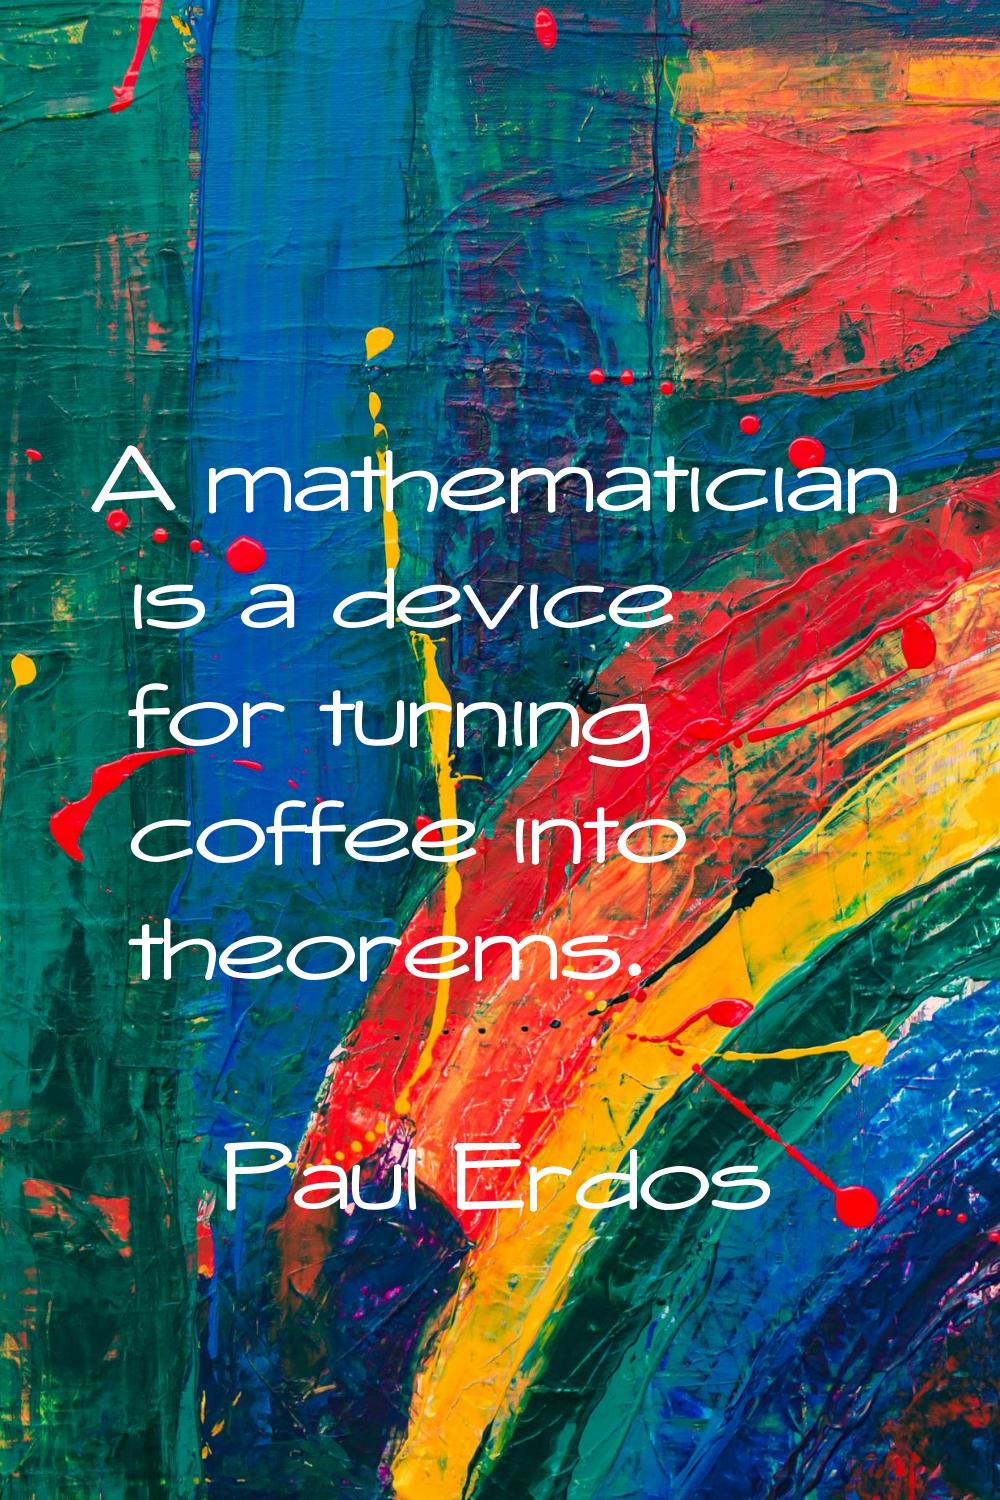 A mathematician is a device for turning coffee into theorems.